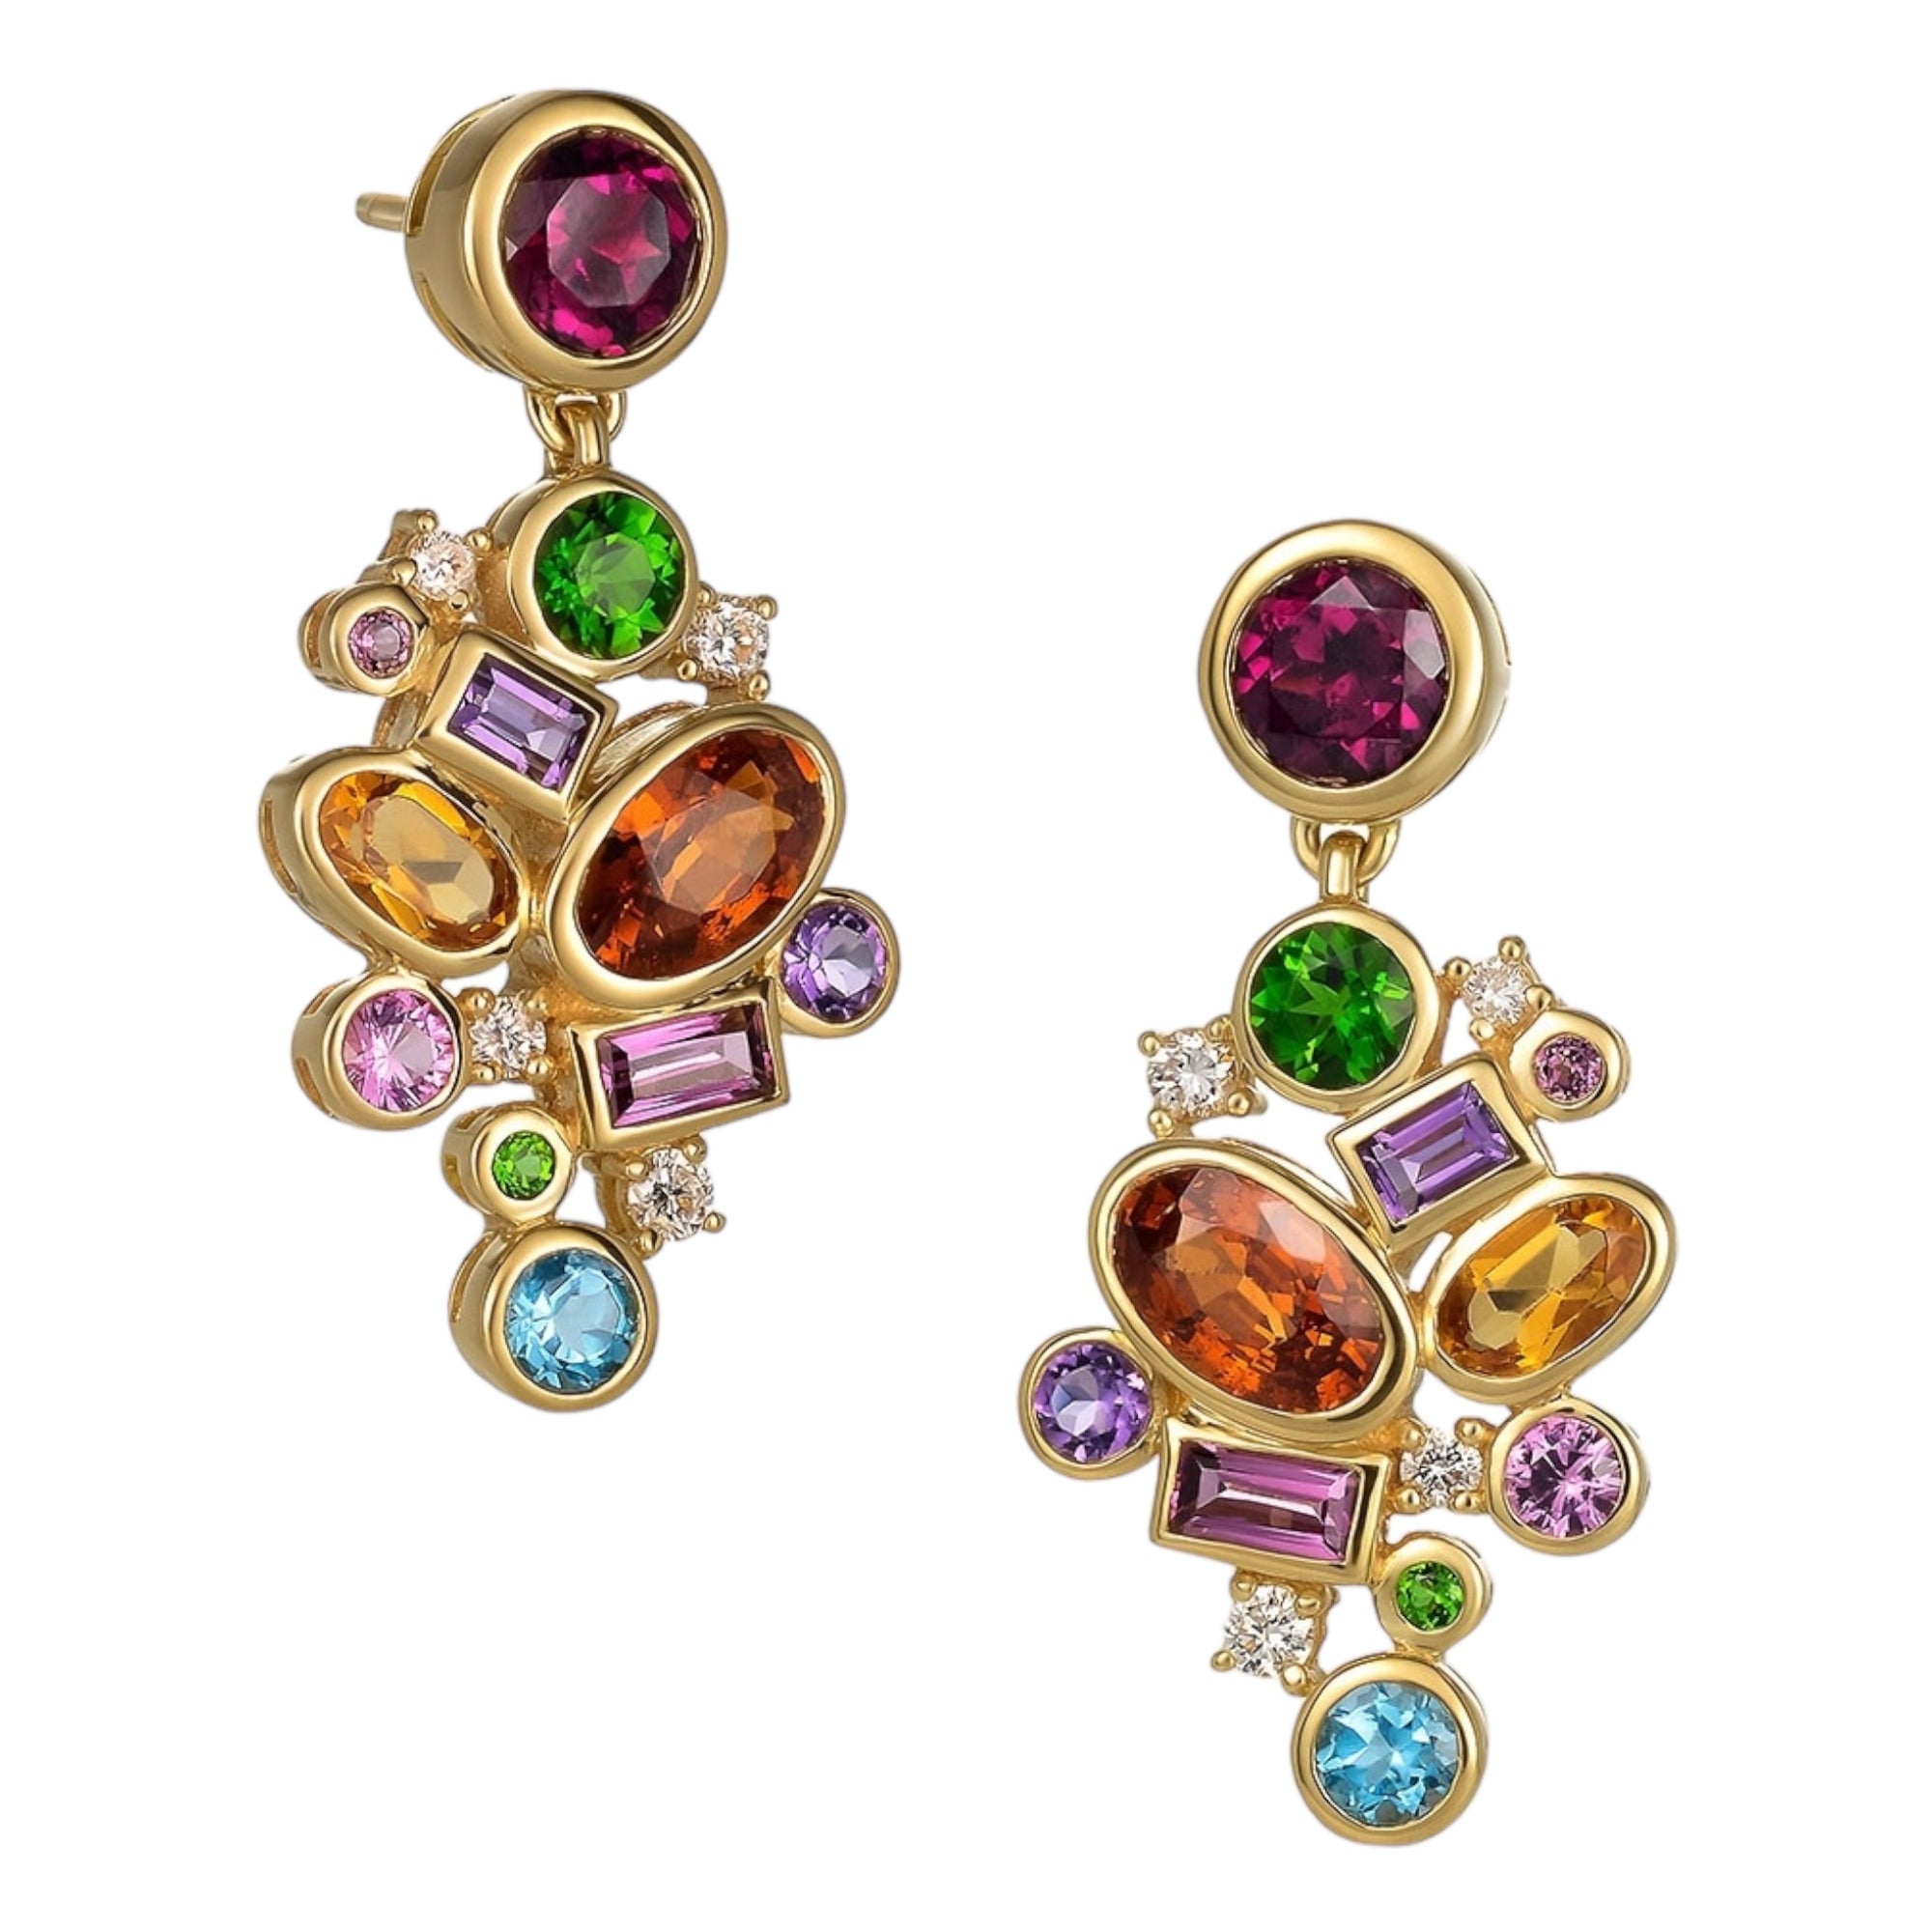 Supernova Earrings by Martha Seely available at Talisman Collection Fine Jewelers in El Dorado Hills, CA and online. Stats: Designed to make everyday feel special, these petite earrings showcase 5.14 cts of multicolored gems: rhodolites, chrome diopside, pink sapphire, Swiss blue topaz, amethysts, spessartites and citrines, and diamonds, let's not forget a scattering of .2 cts of sparkling white diamonds... Crafted in 14k gold and measuring 1.18” L x 0.6” W 